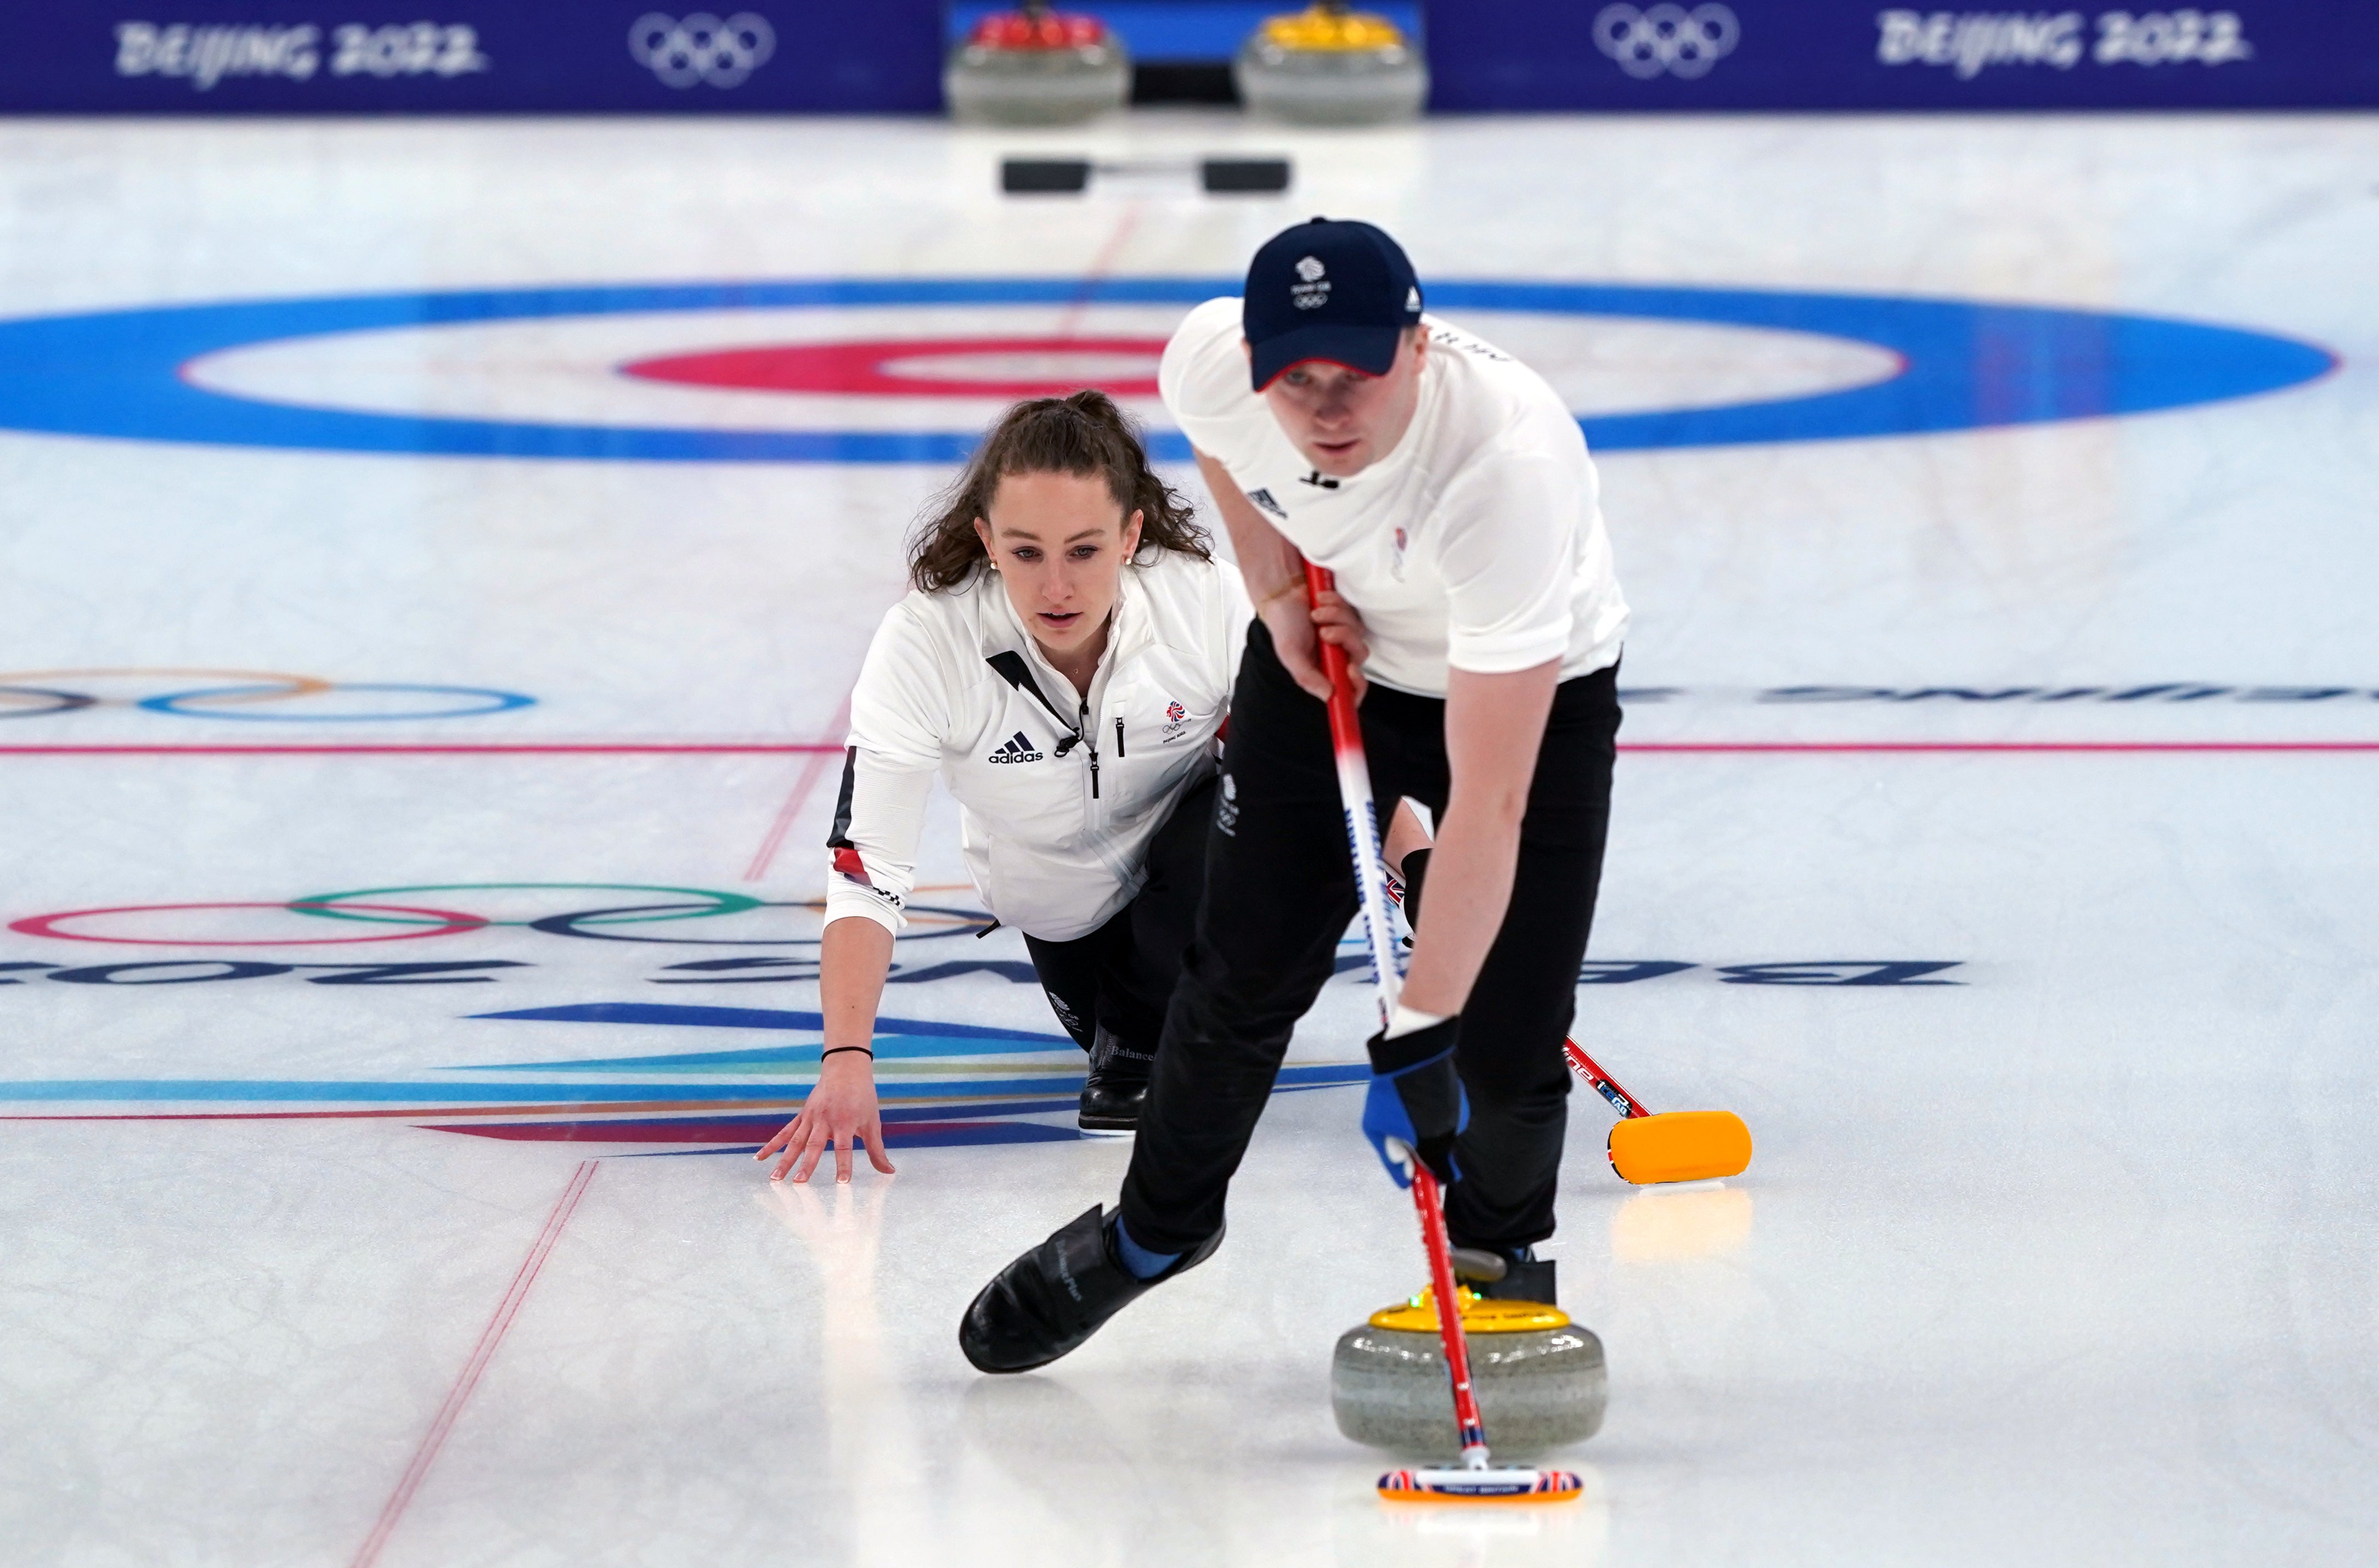 Jennifer Dodds and Bruce Mouat moved one more win away from a medal match (Andrew Milligan/PA)